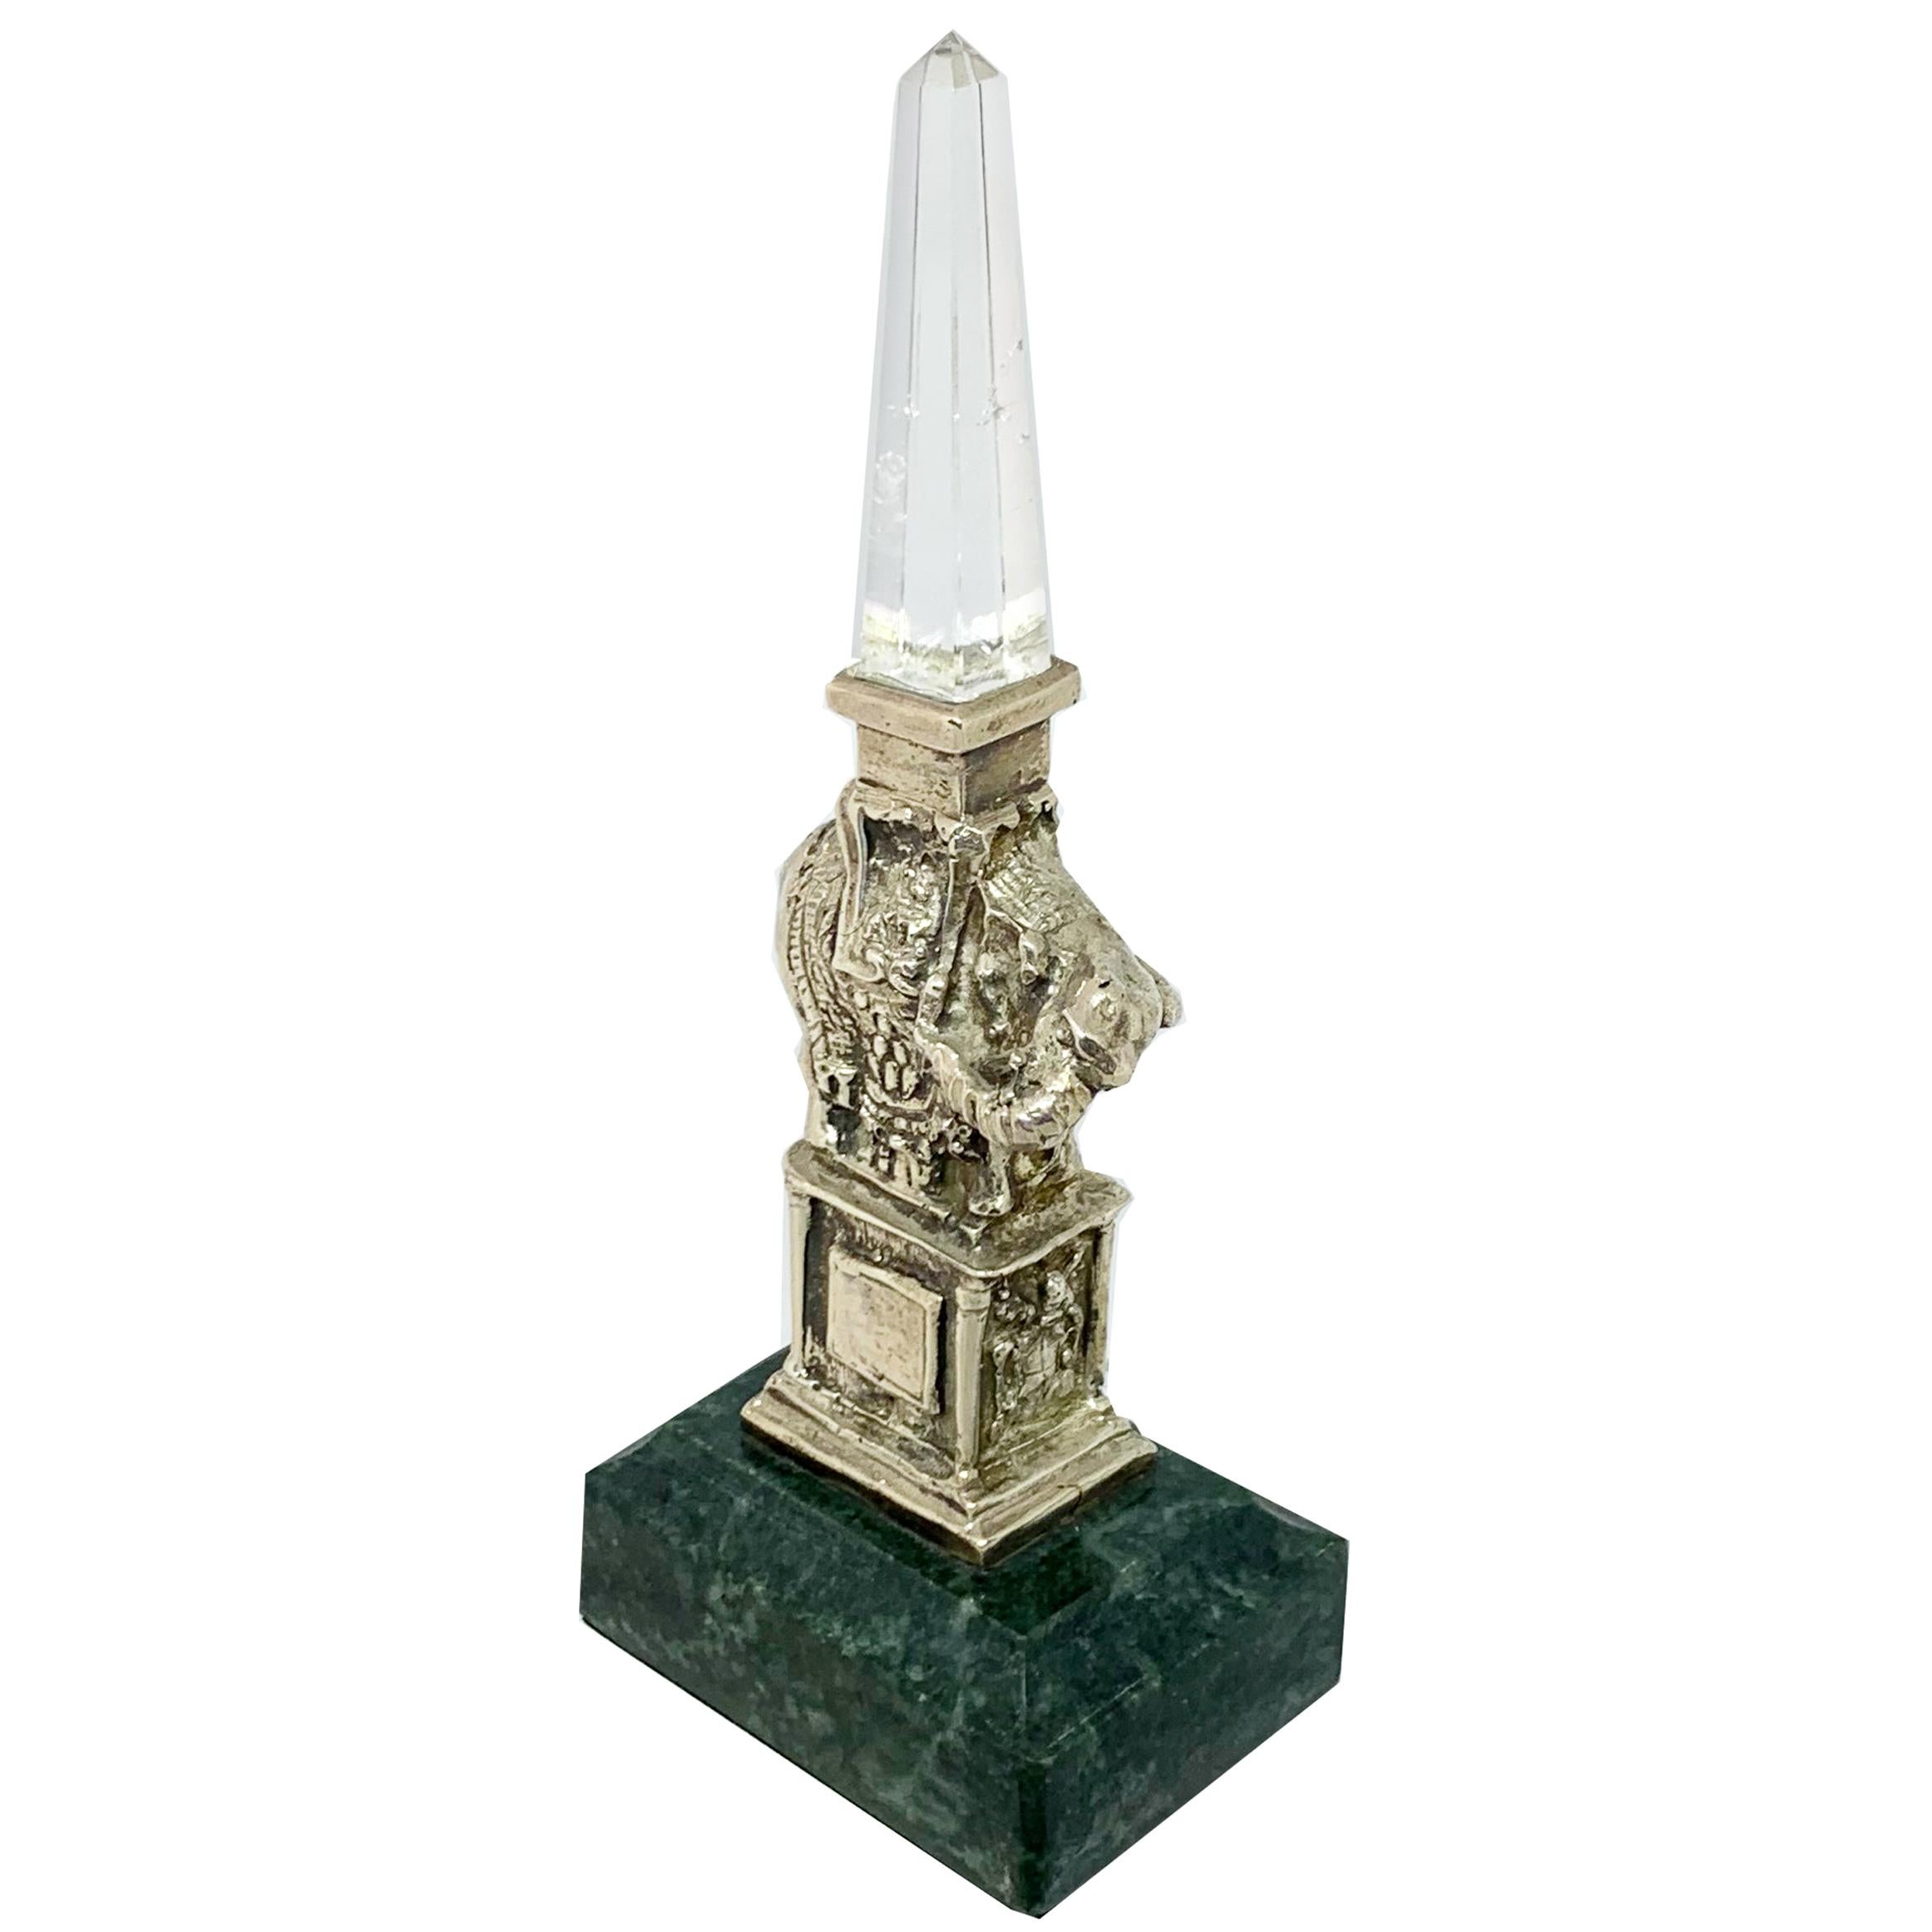 This sterling silver and rock crystal statue was made by our talented Roman artisans, and reproduces a famous monument in Rome.
Adjacent to the Pantheon, in front of the Dominican church “Santa Maria Sopra La Minerva” (St.Mary Over Minerva), lies